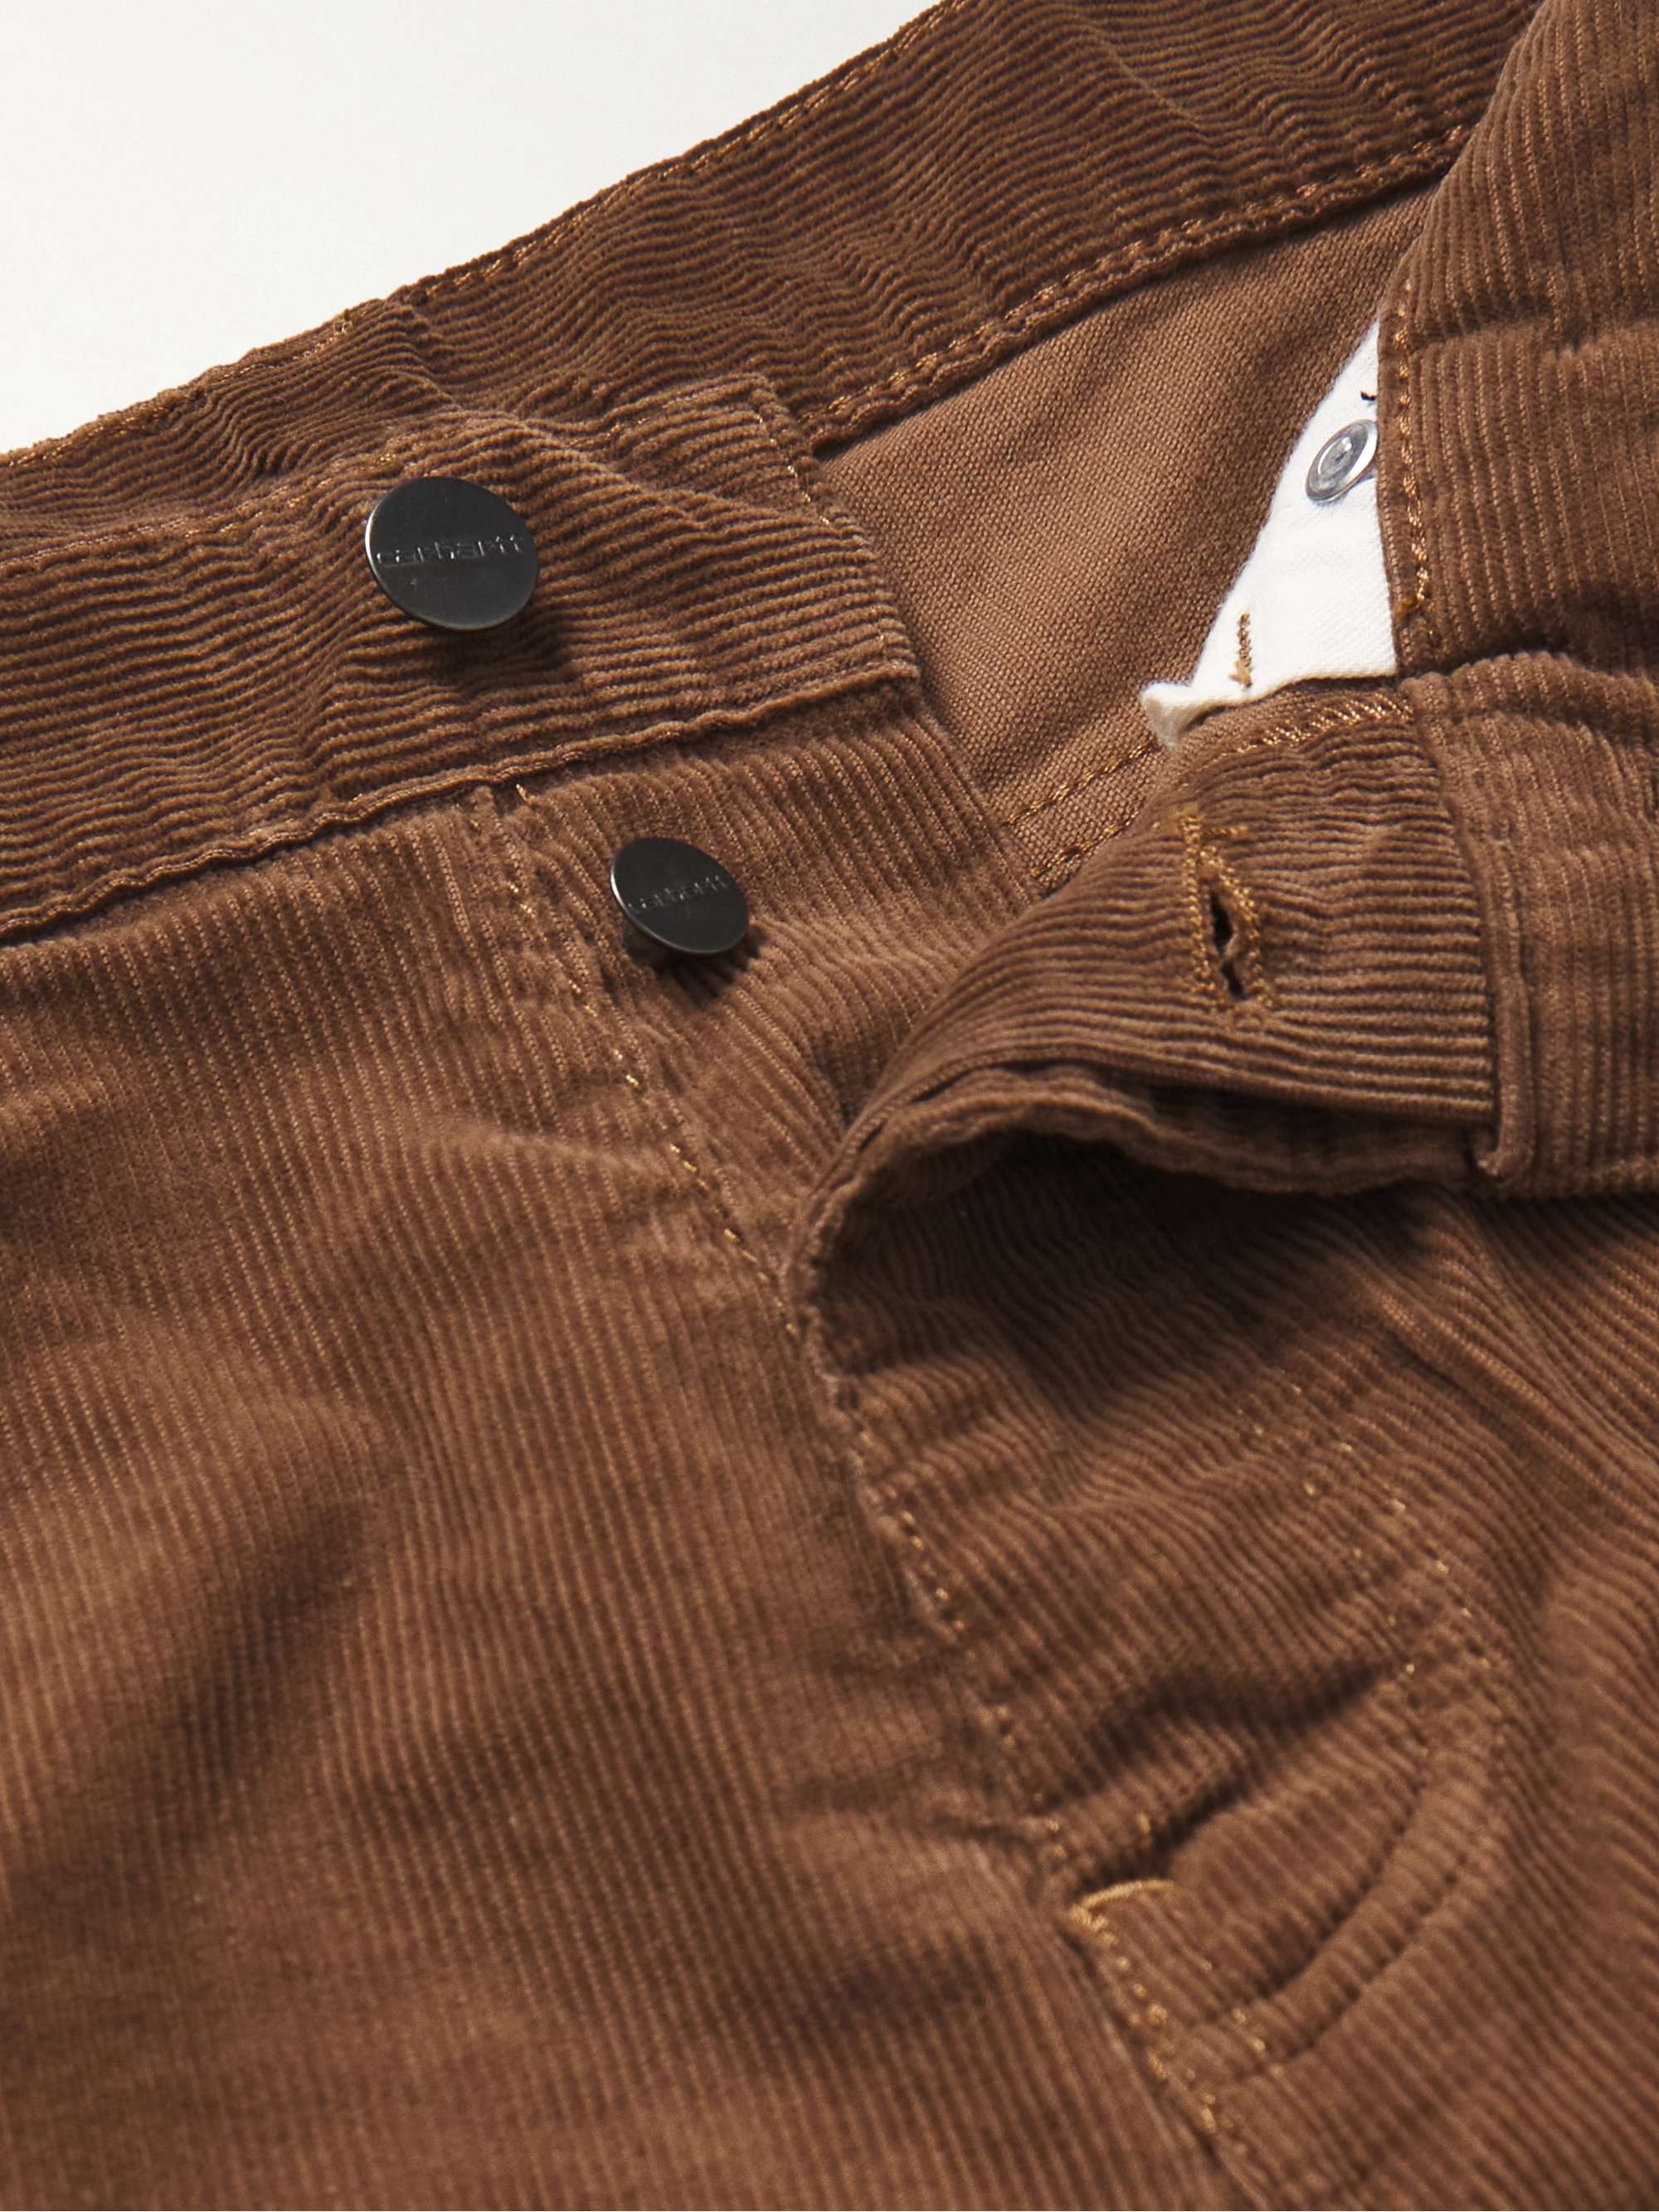 CARHARTT WIP Newel Tapered Cotton-Corduroy Trousers